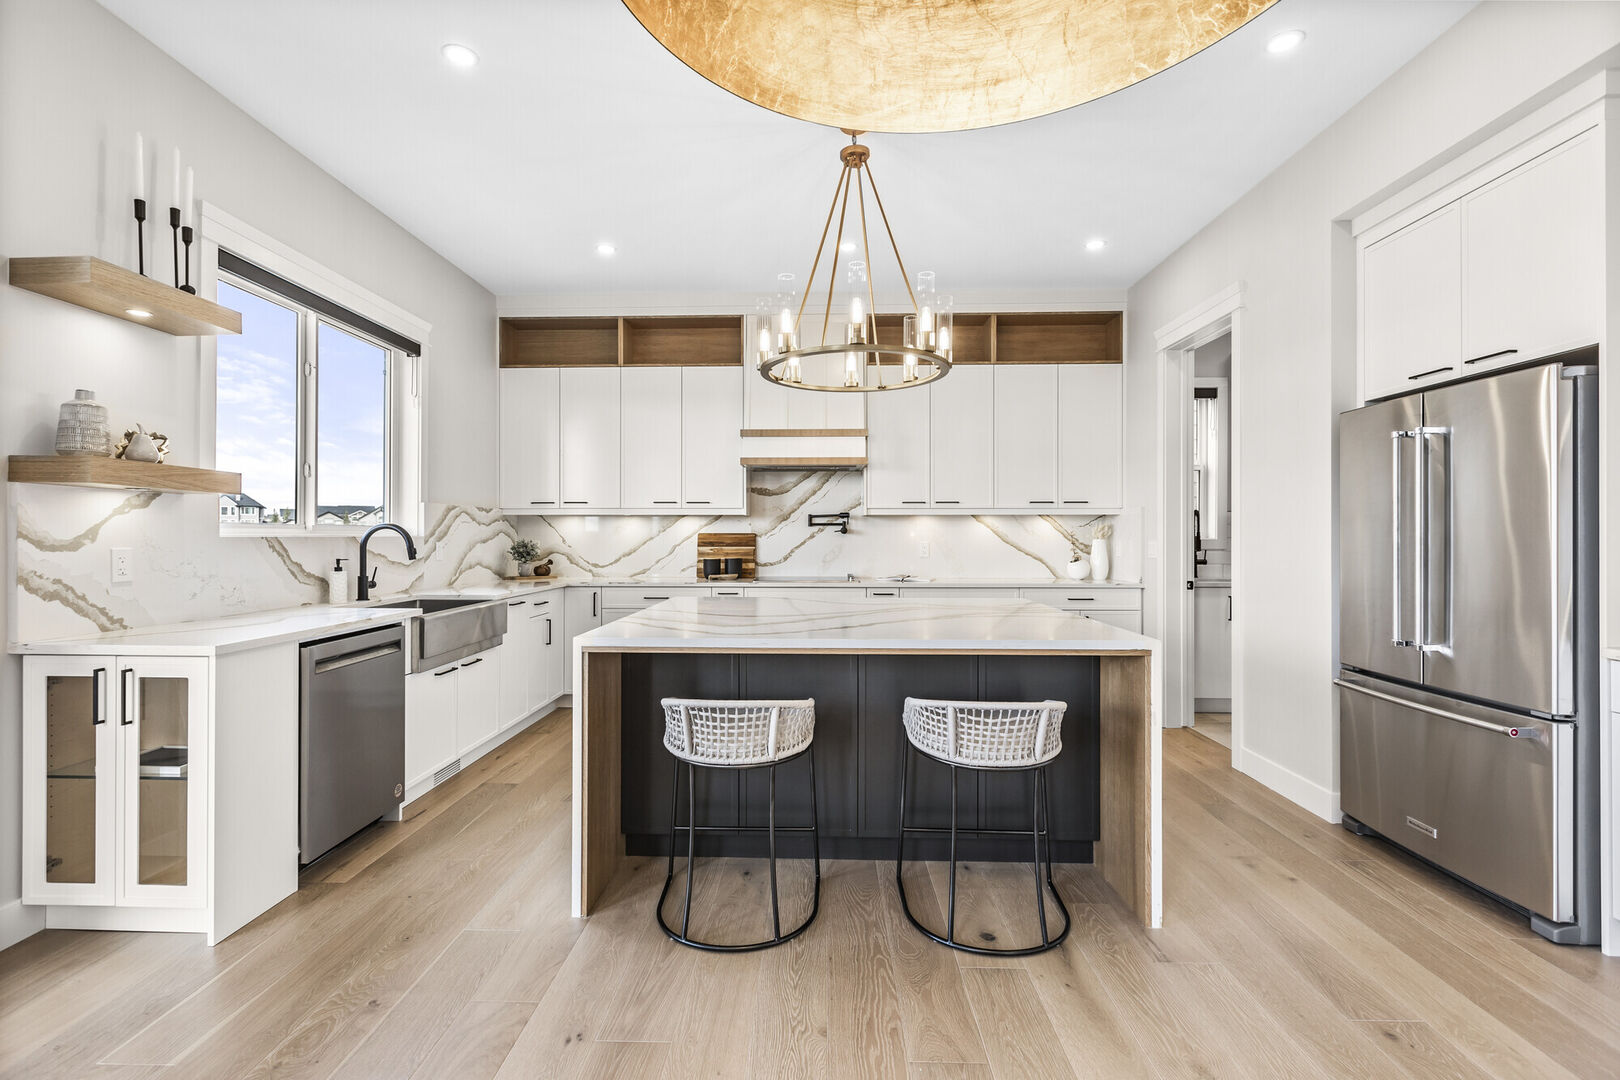 Modern luxury kitchen with stools at island, marble and wood counter tops